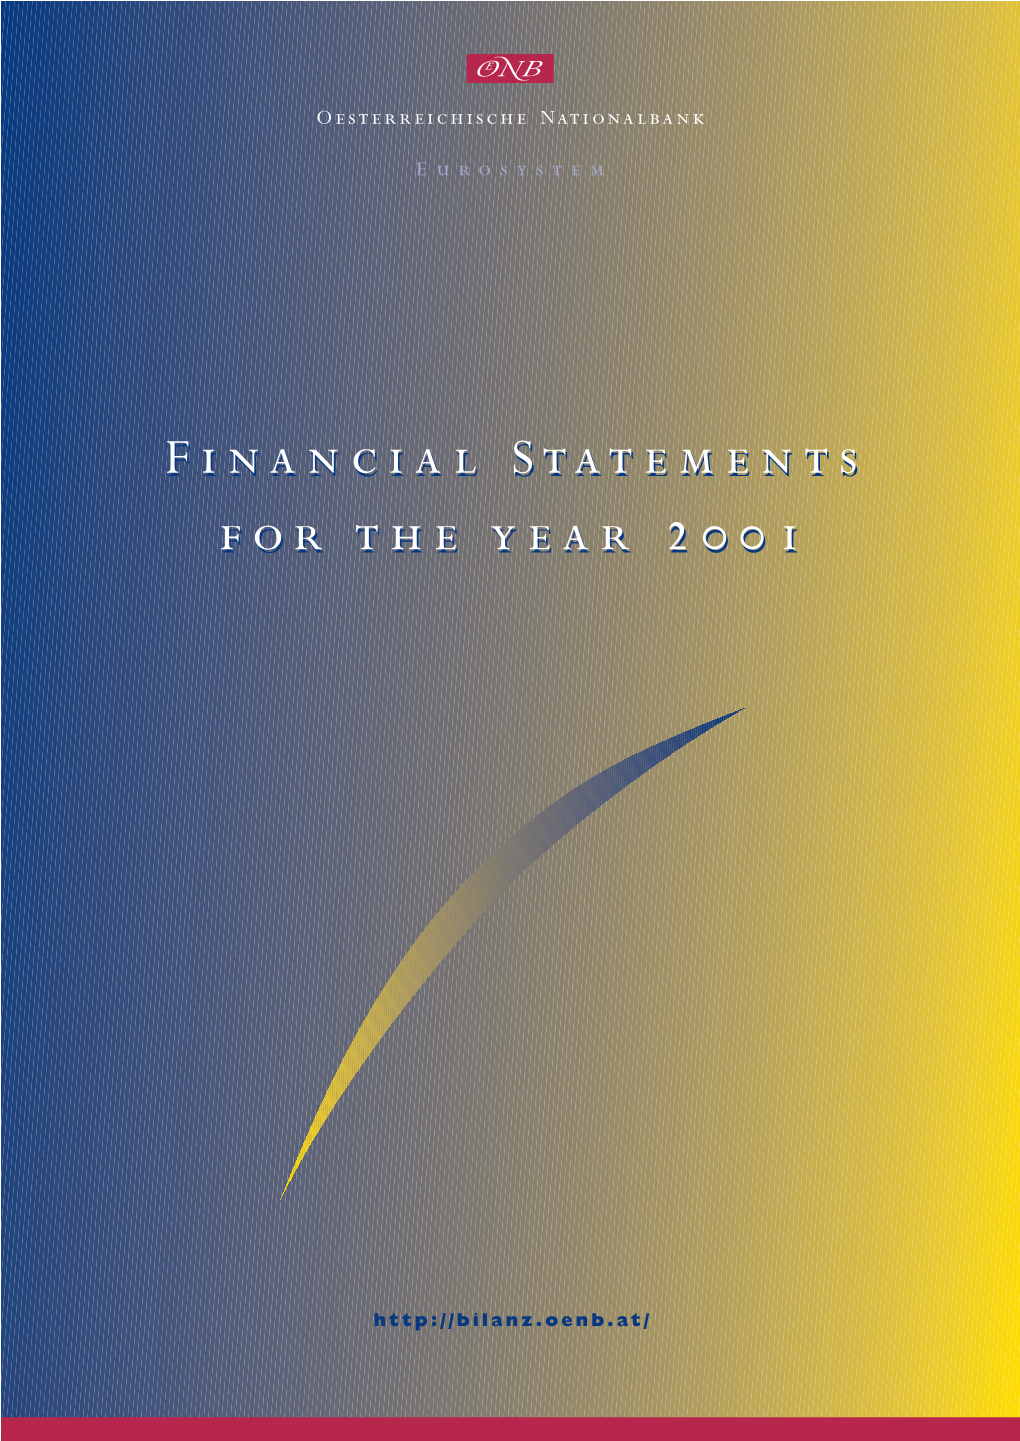 Financial Statements for the Year 2001